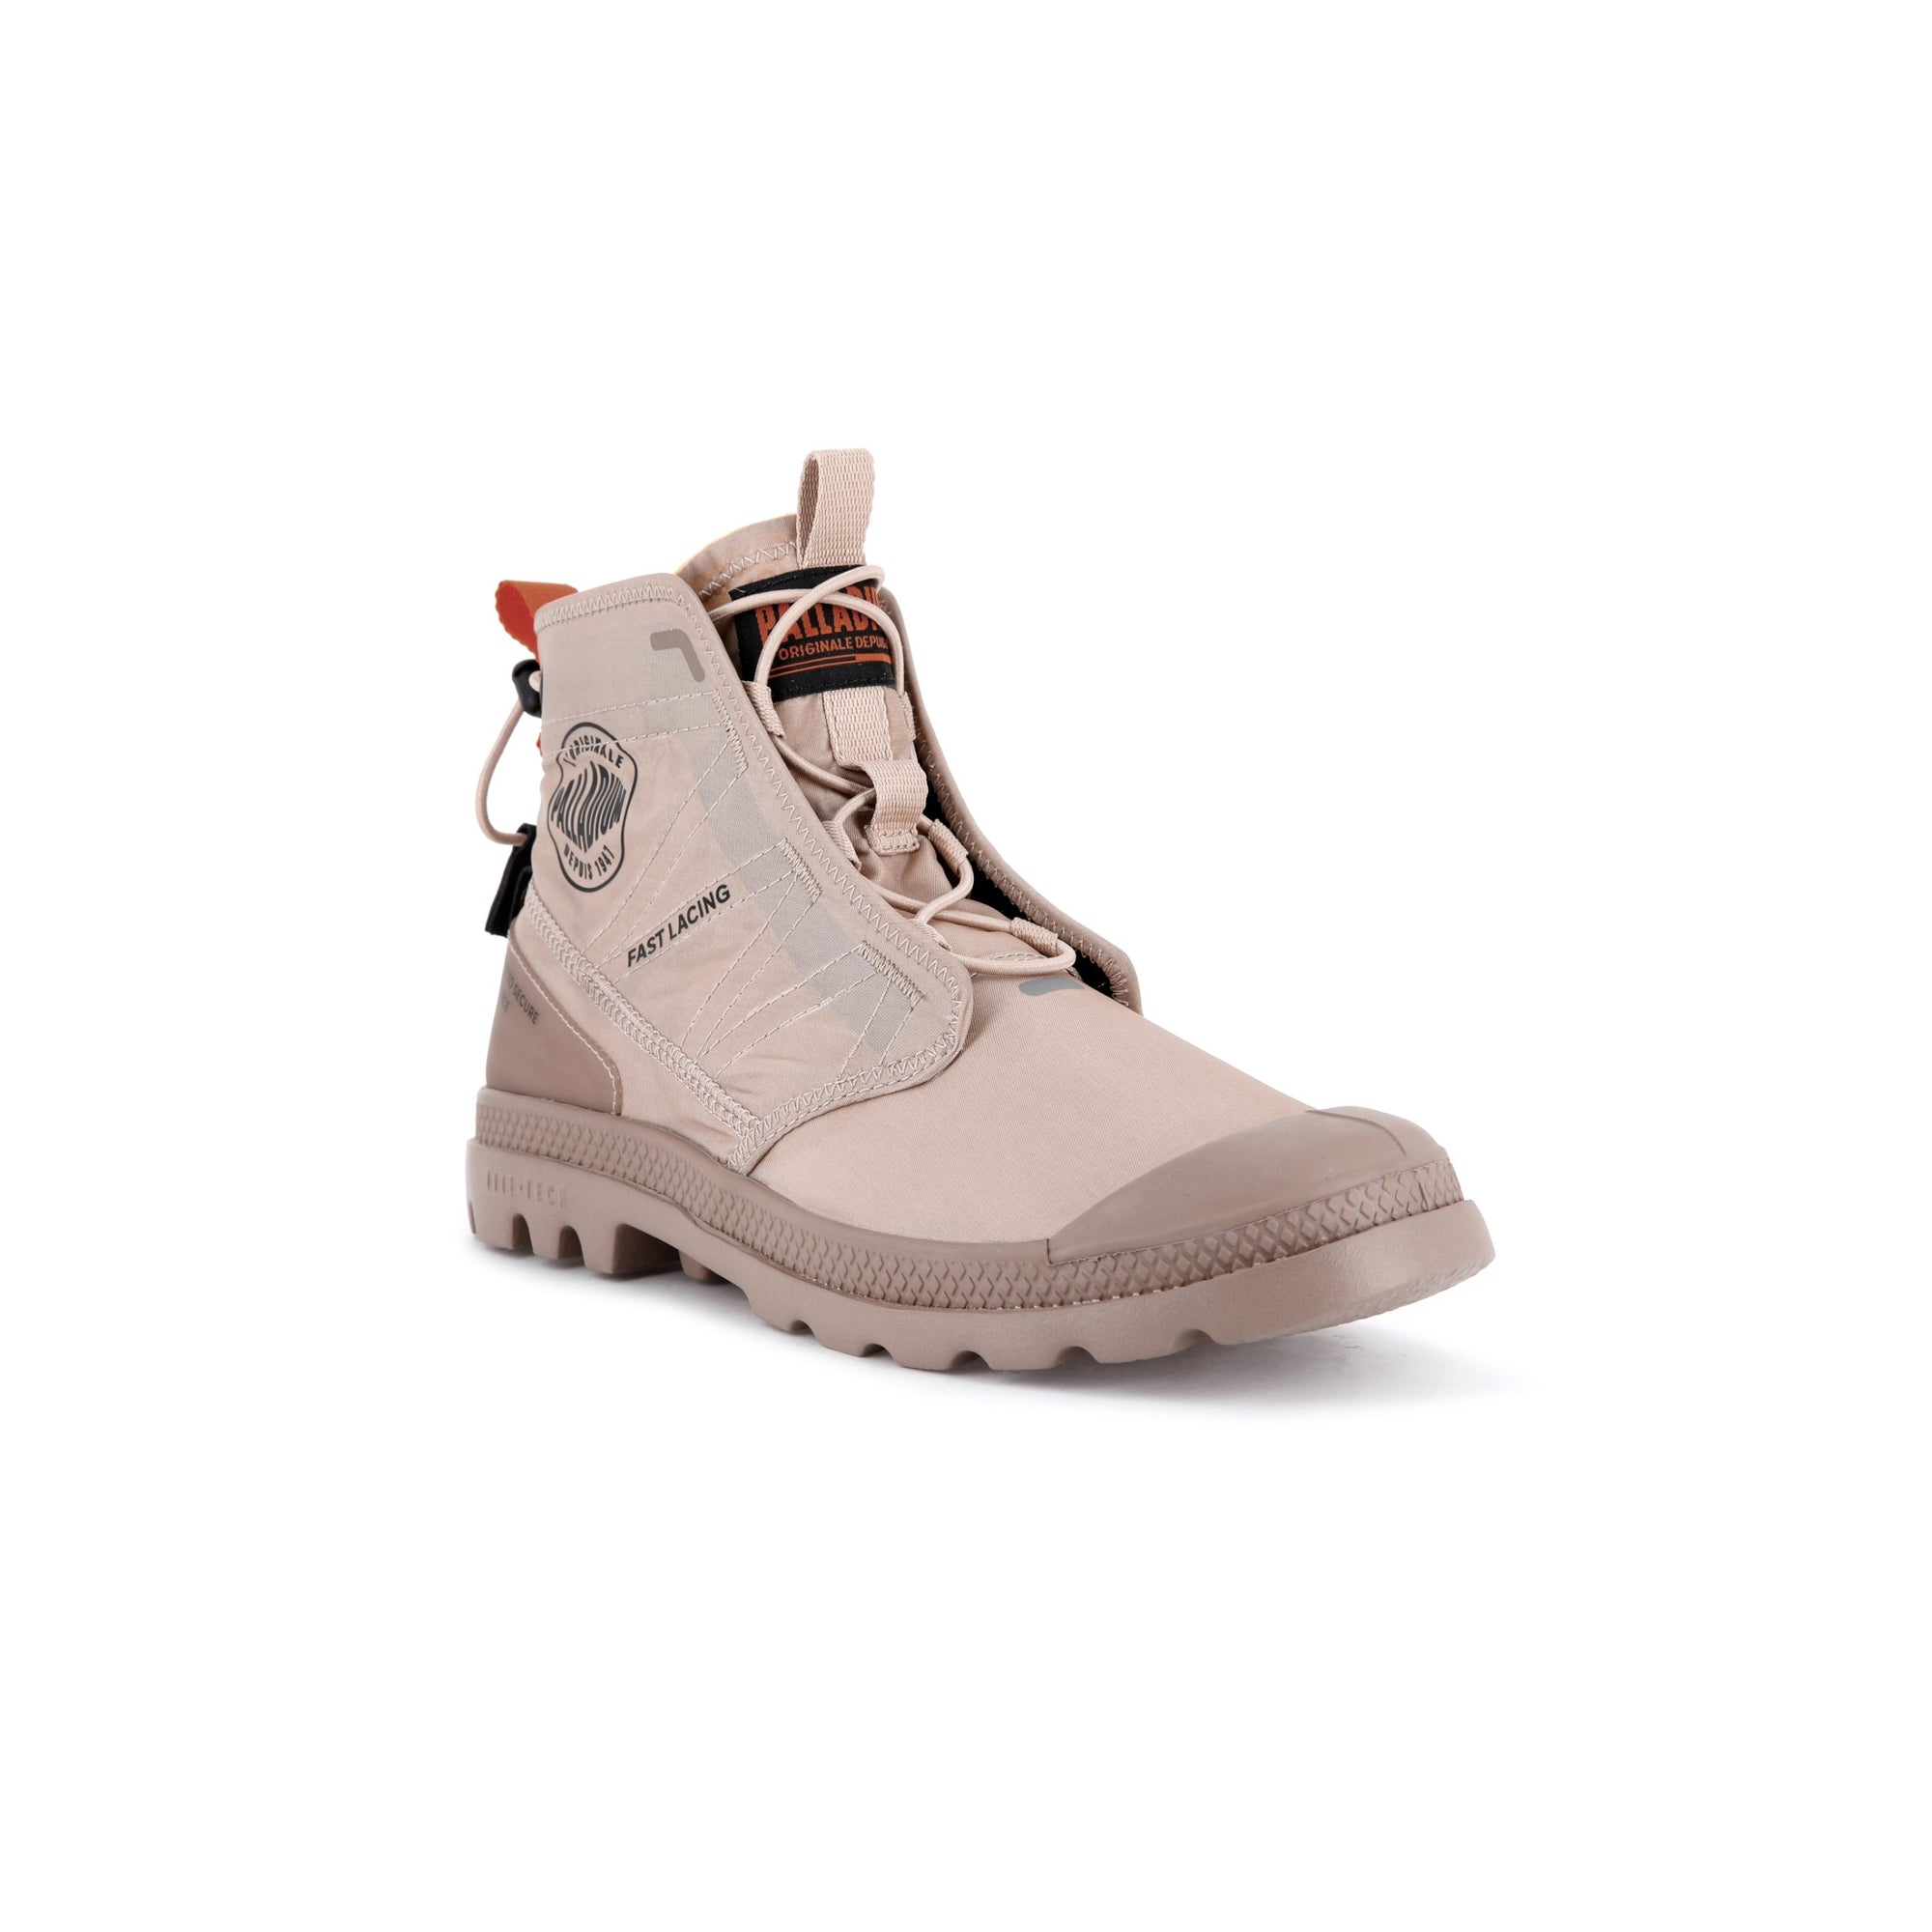 Pampa Travel Lite - Nude Dust